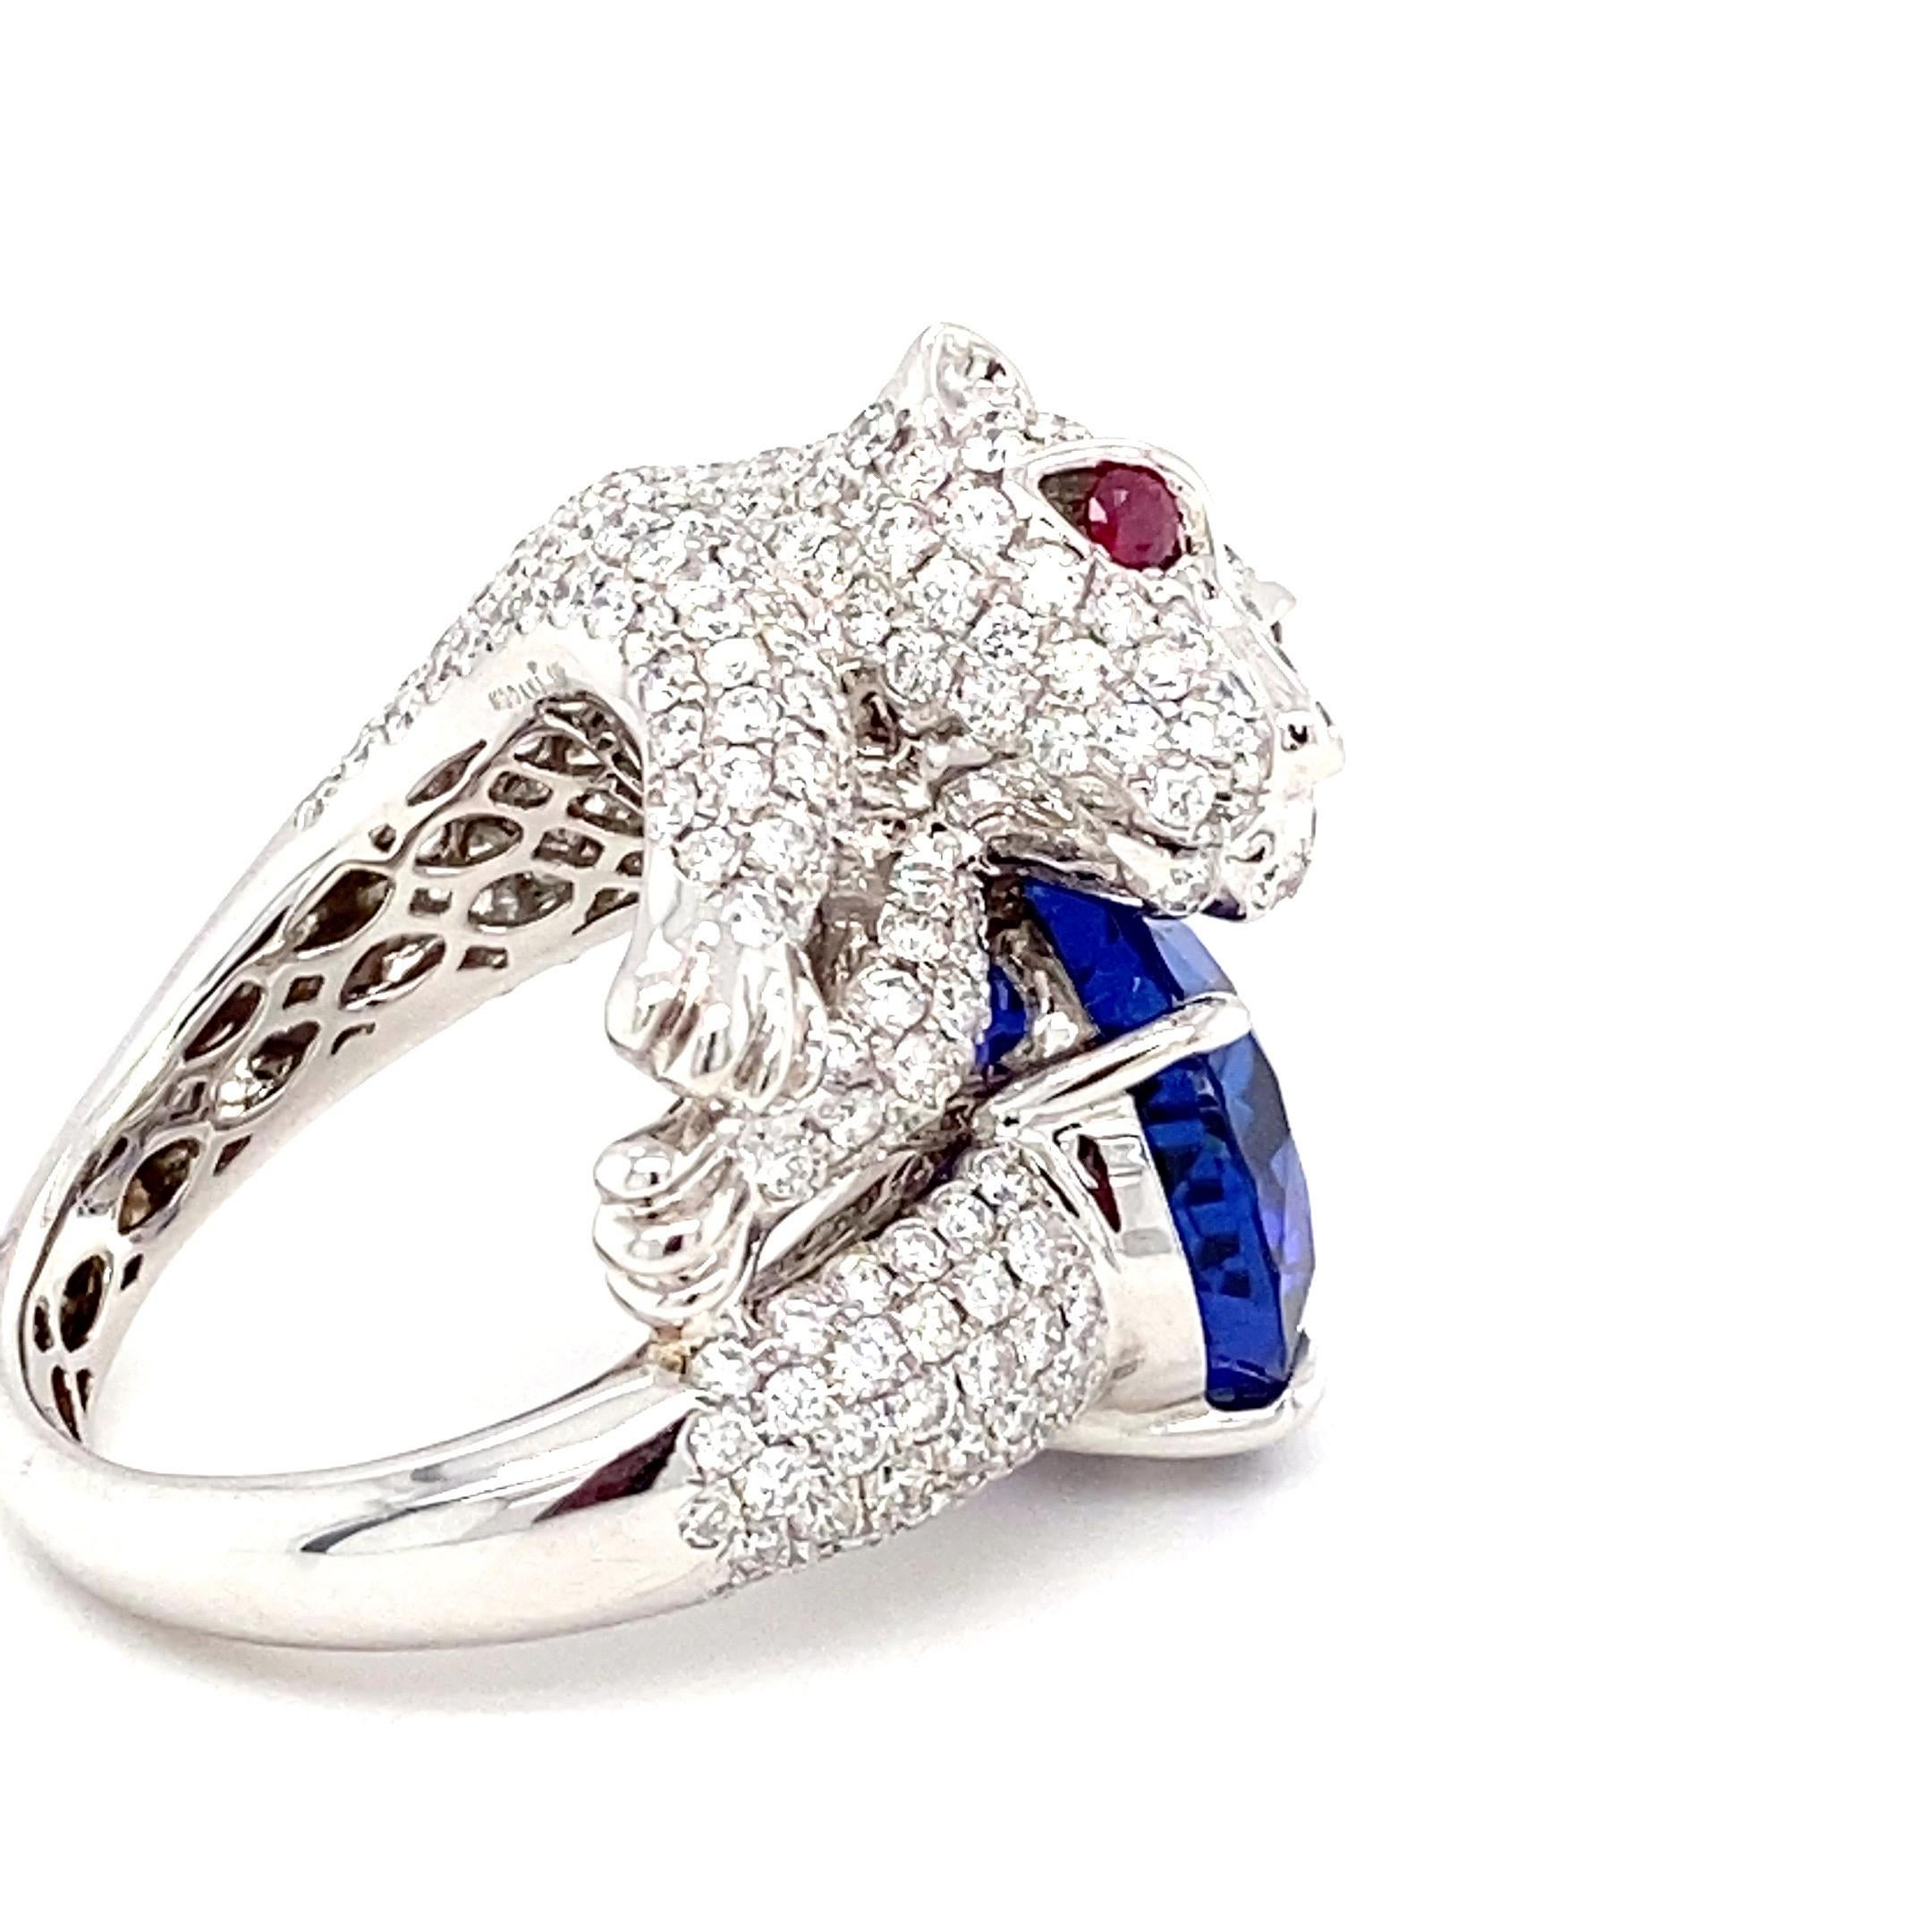 14.44 Carat Tanzanite Diamond White Gold Panther Ring In New Condition For Sale In Trumbull, CT